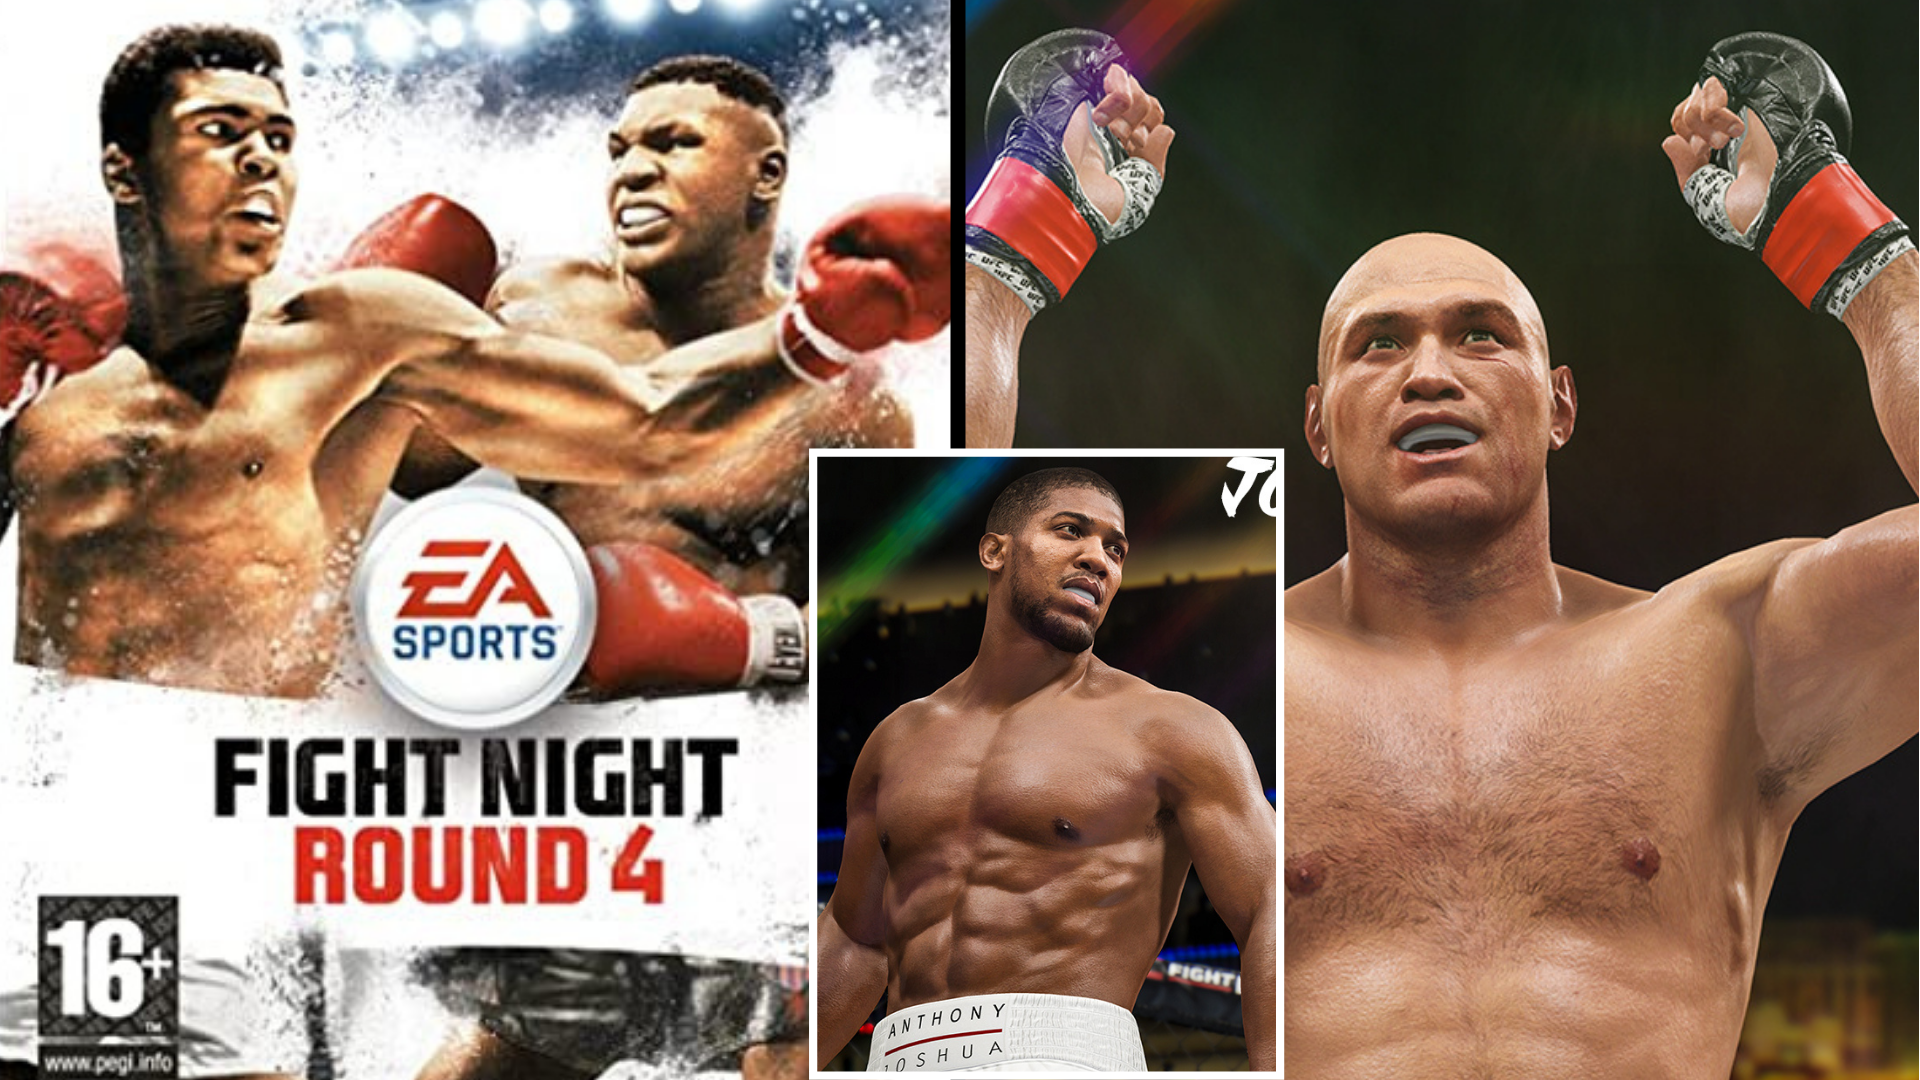 fight night champion release date